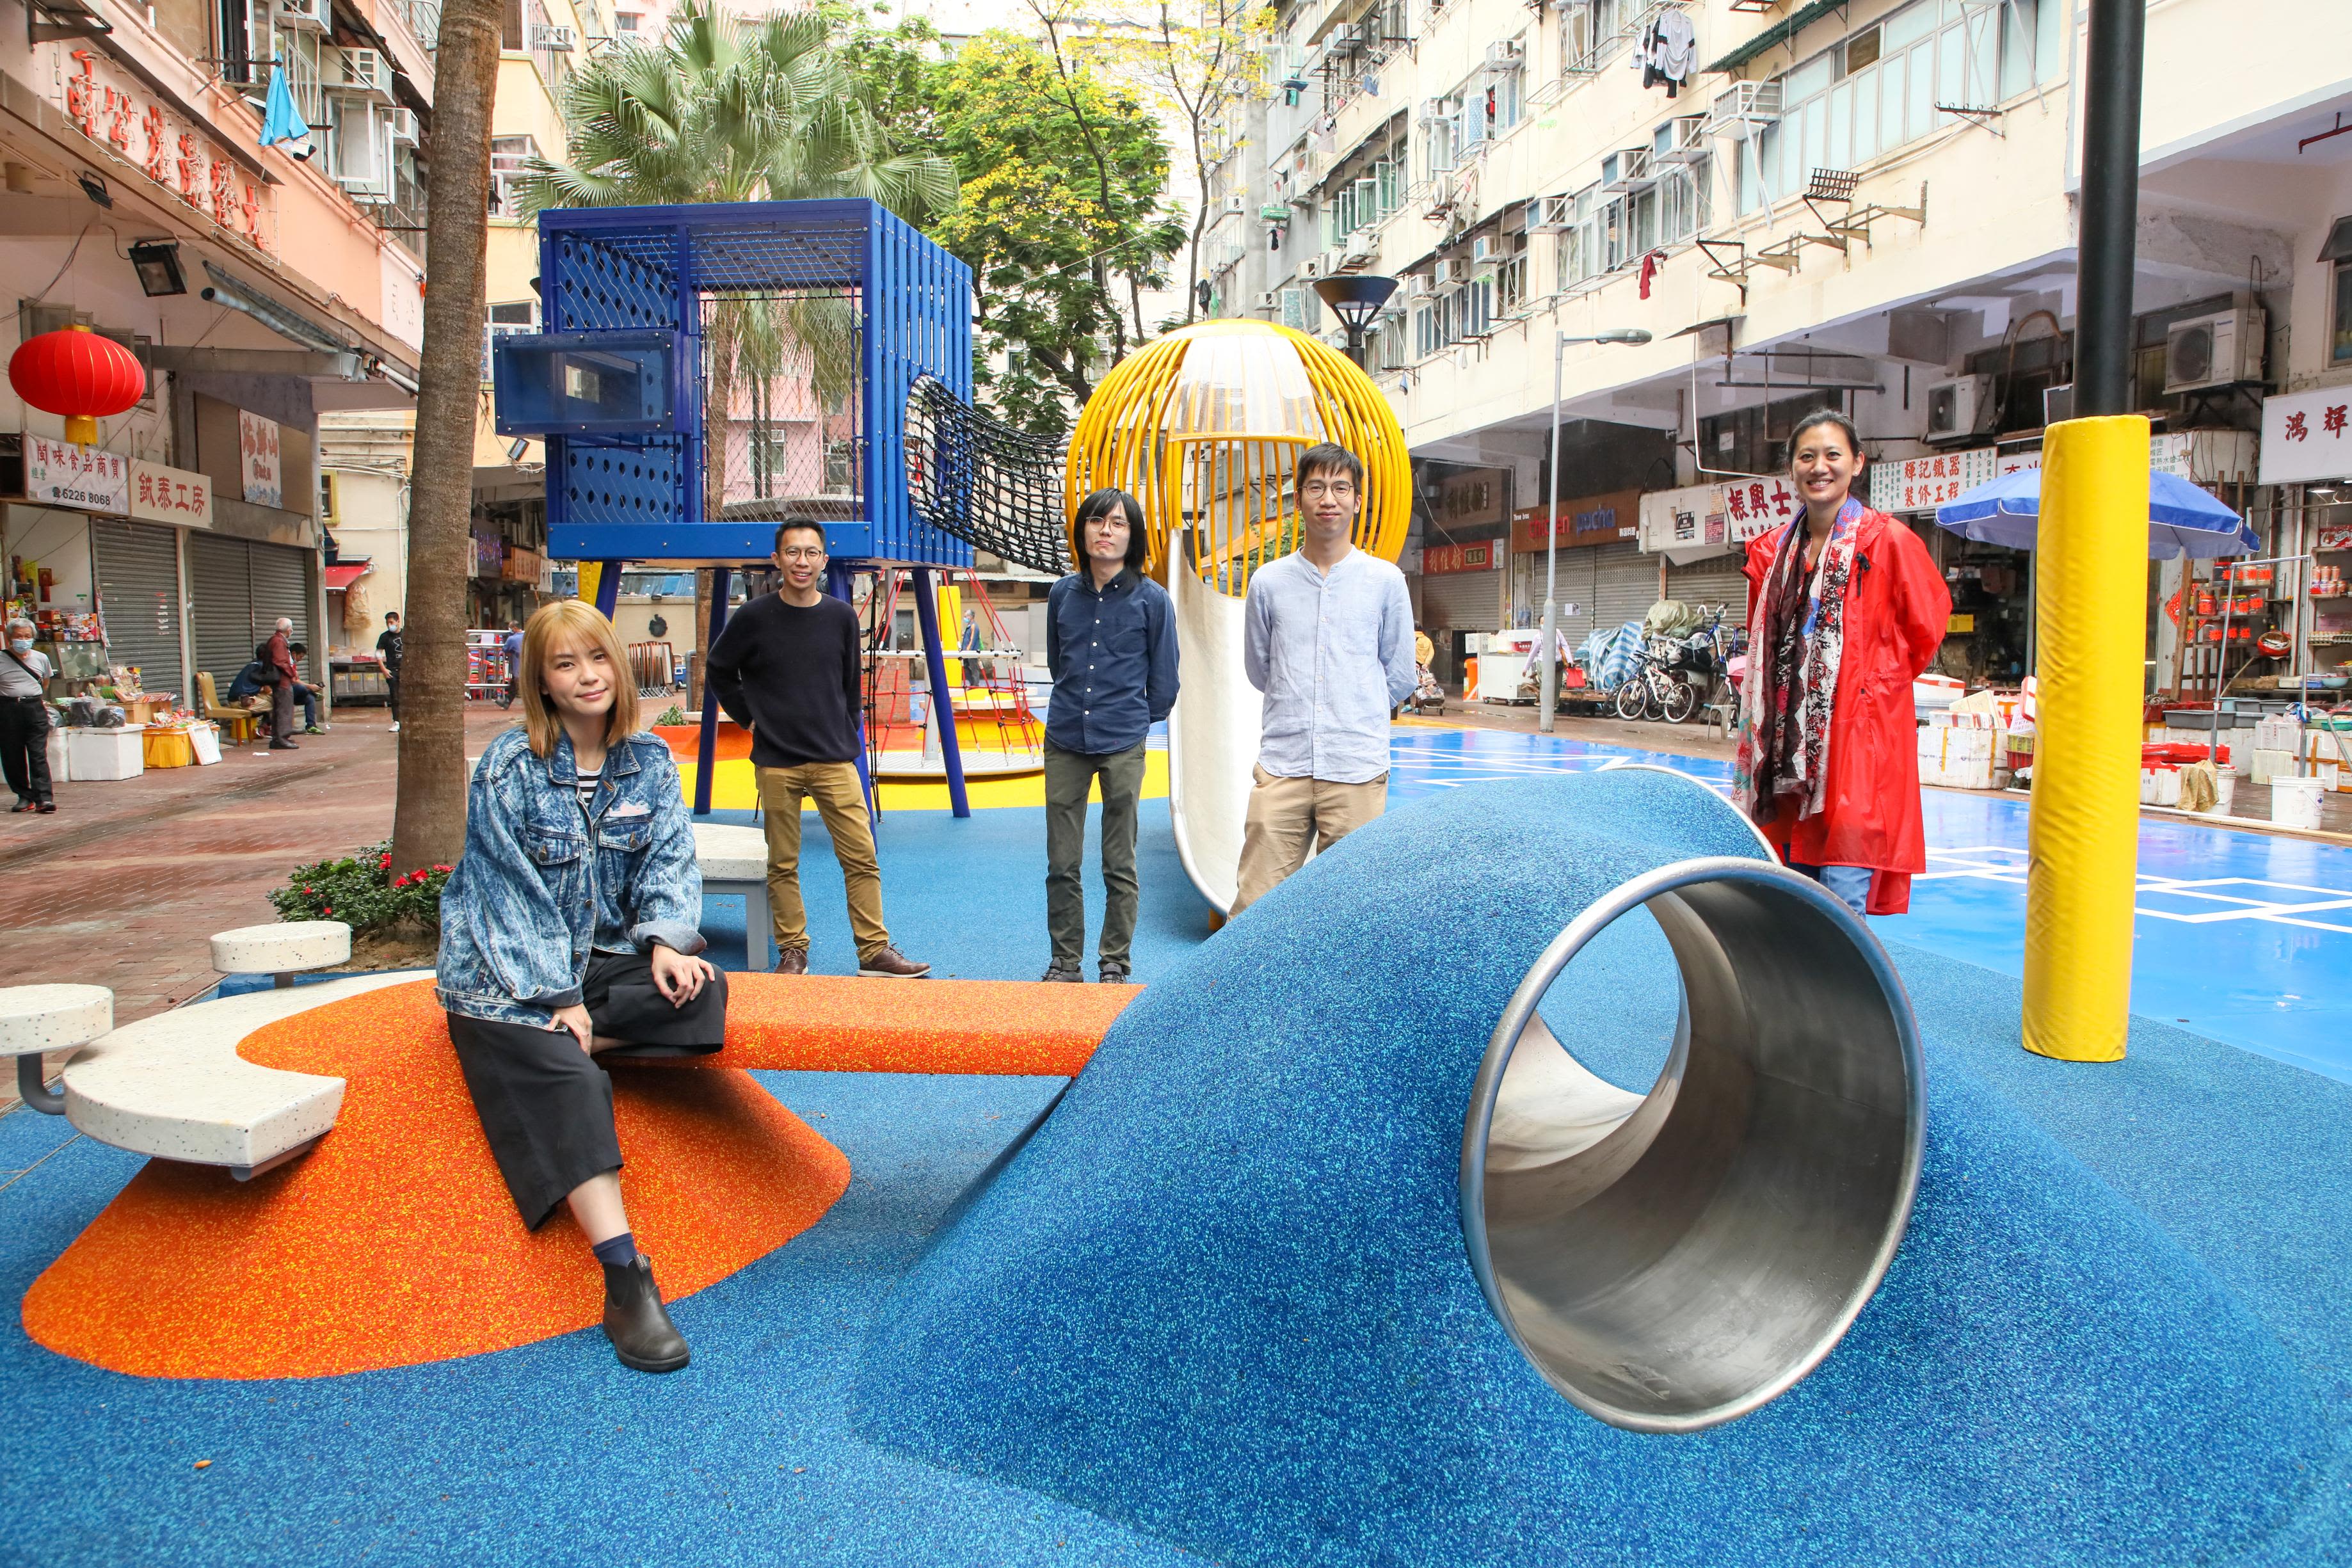 Micro Park Created by Adding Public Seating to a Hong Kong Stairway